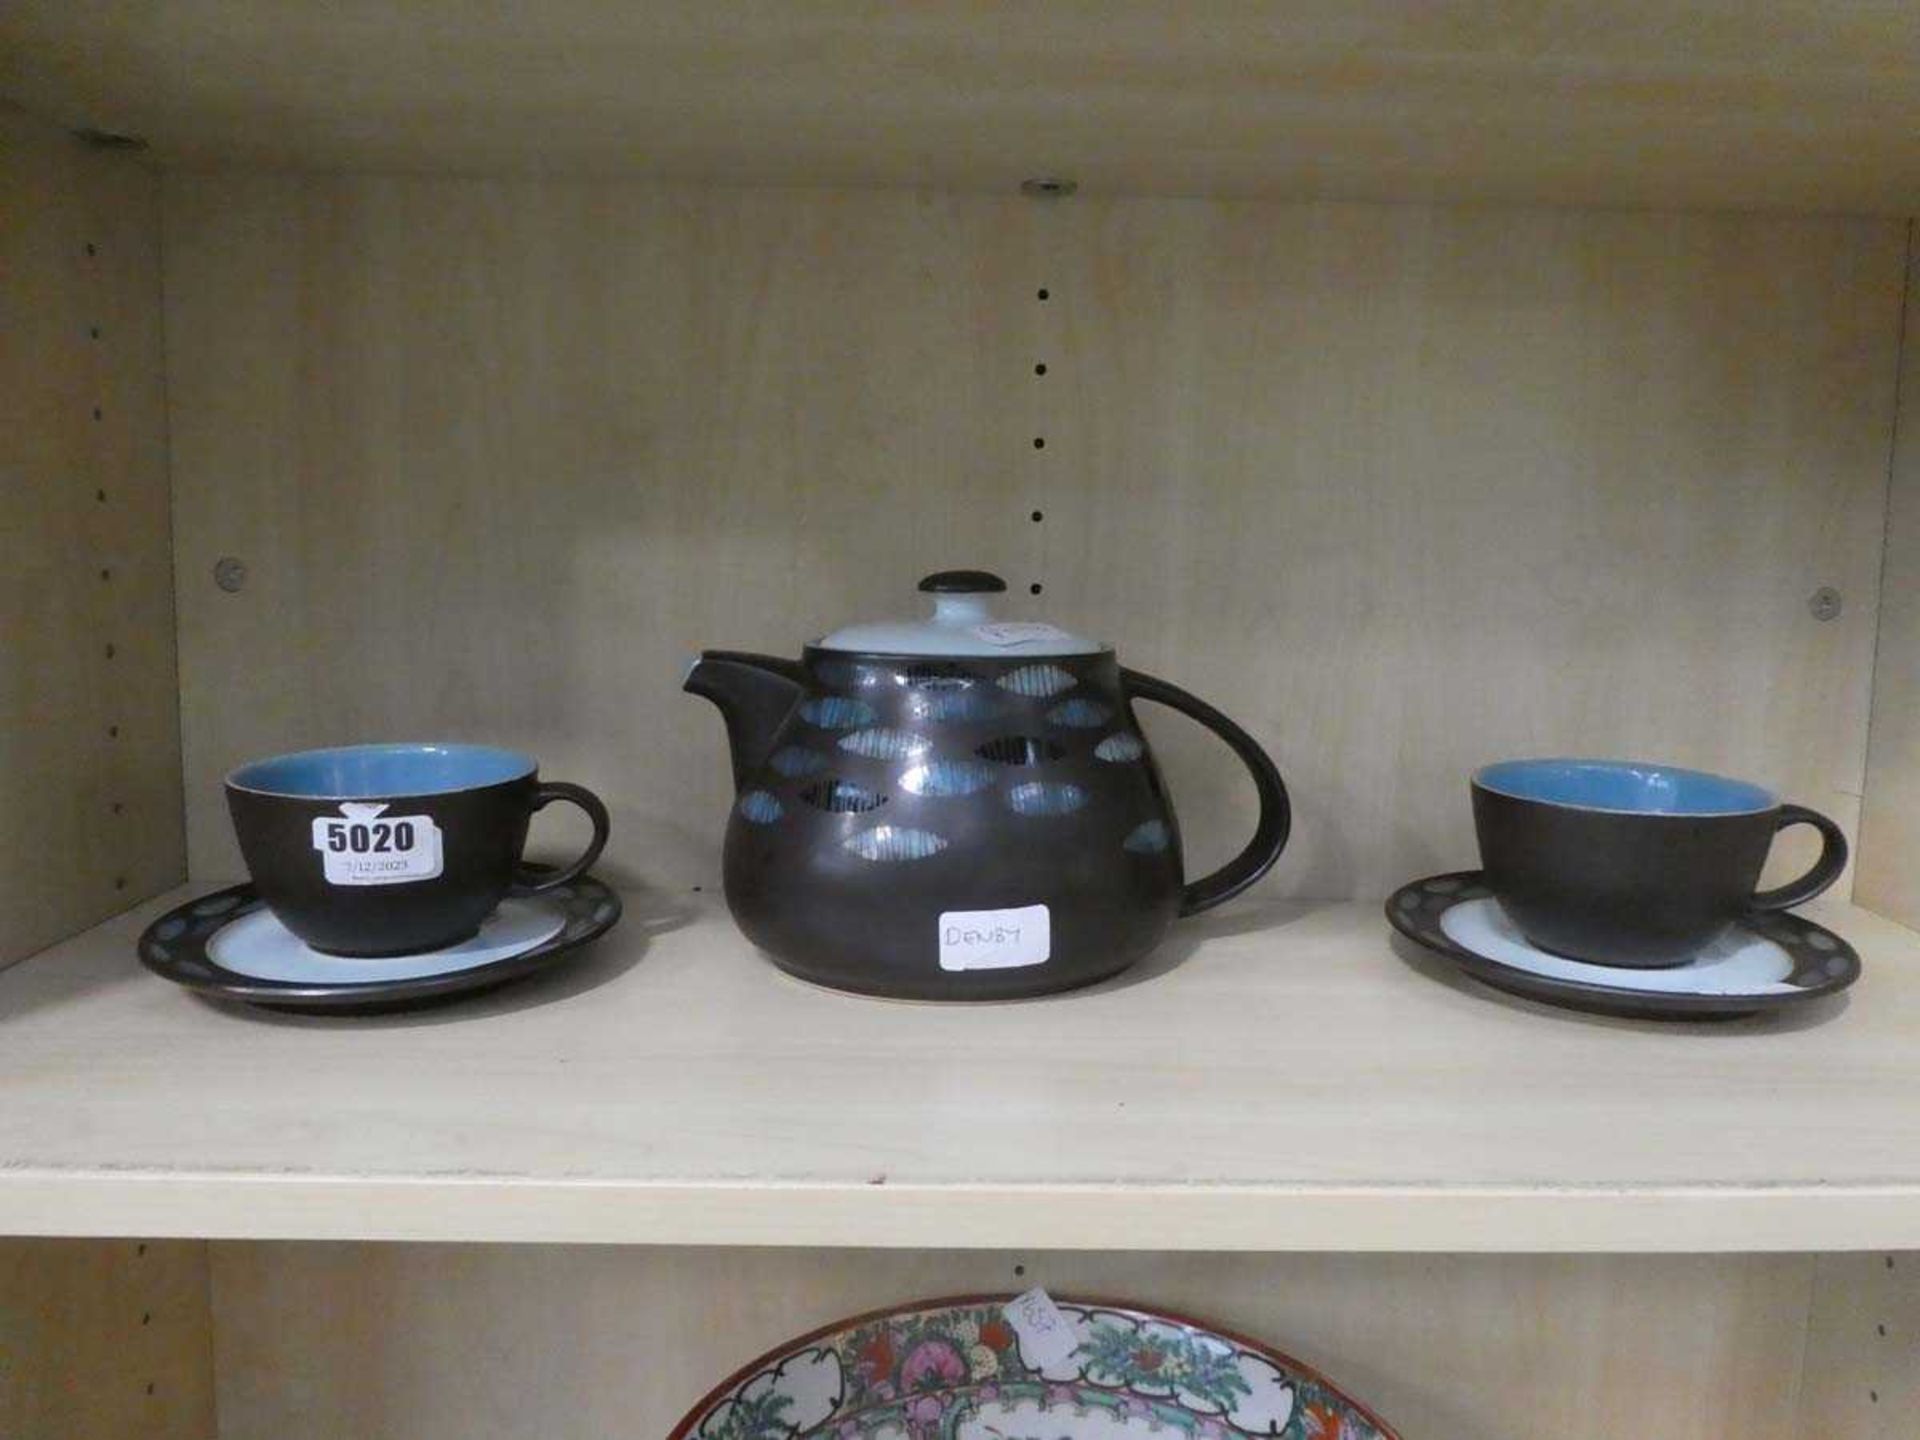 Pair of Denby cups and saucers plus a teapot